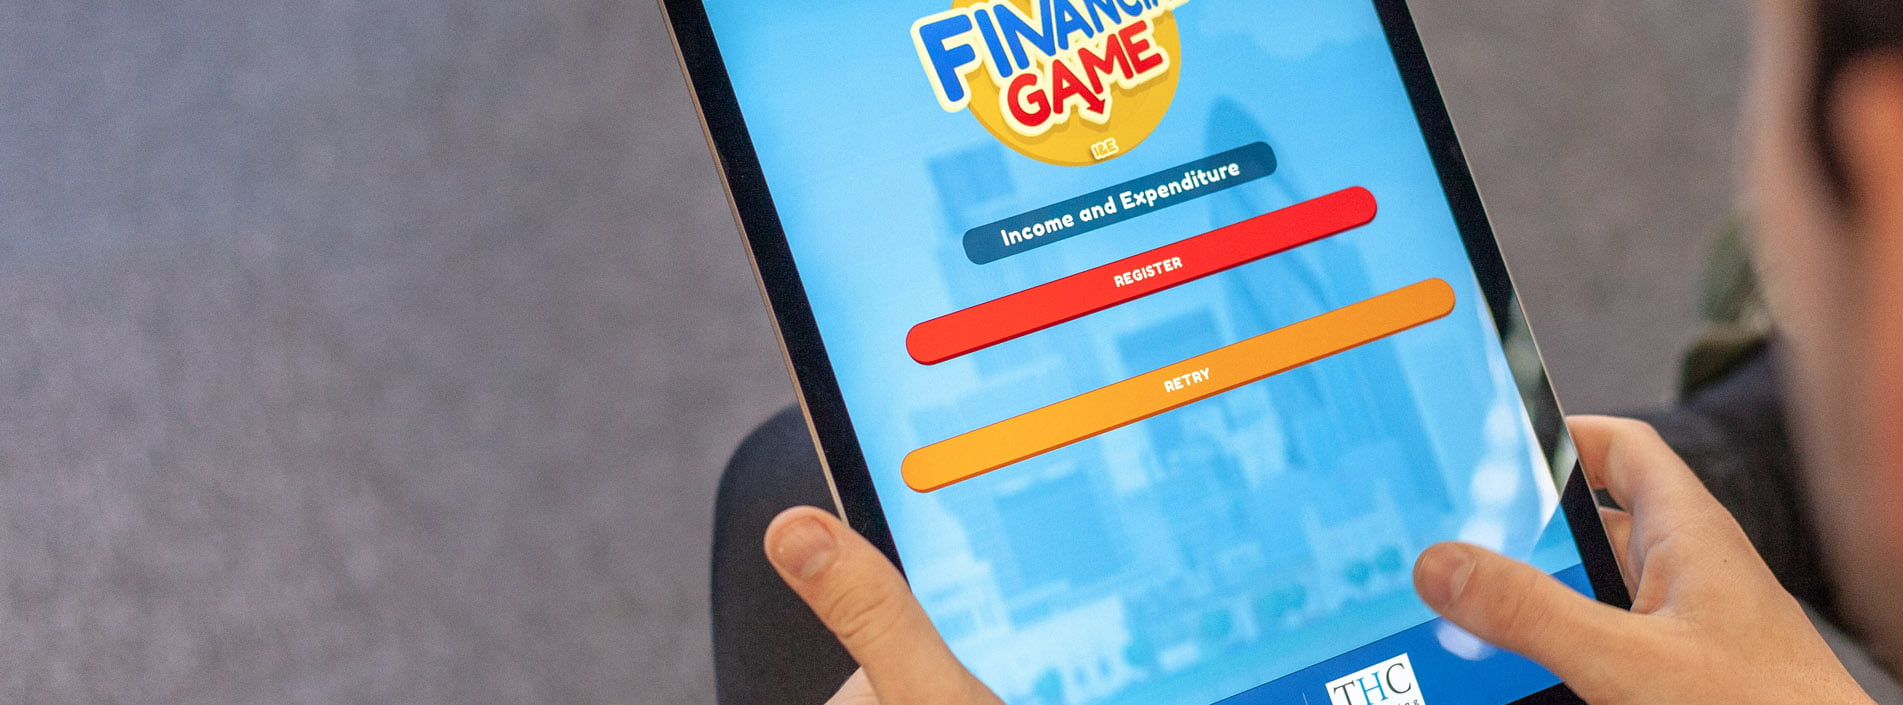 Financial game mobile app development shown on an ipad